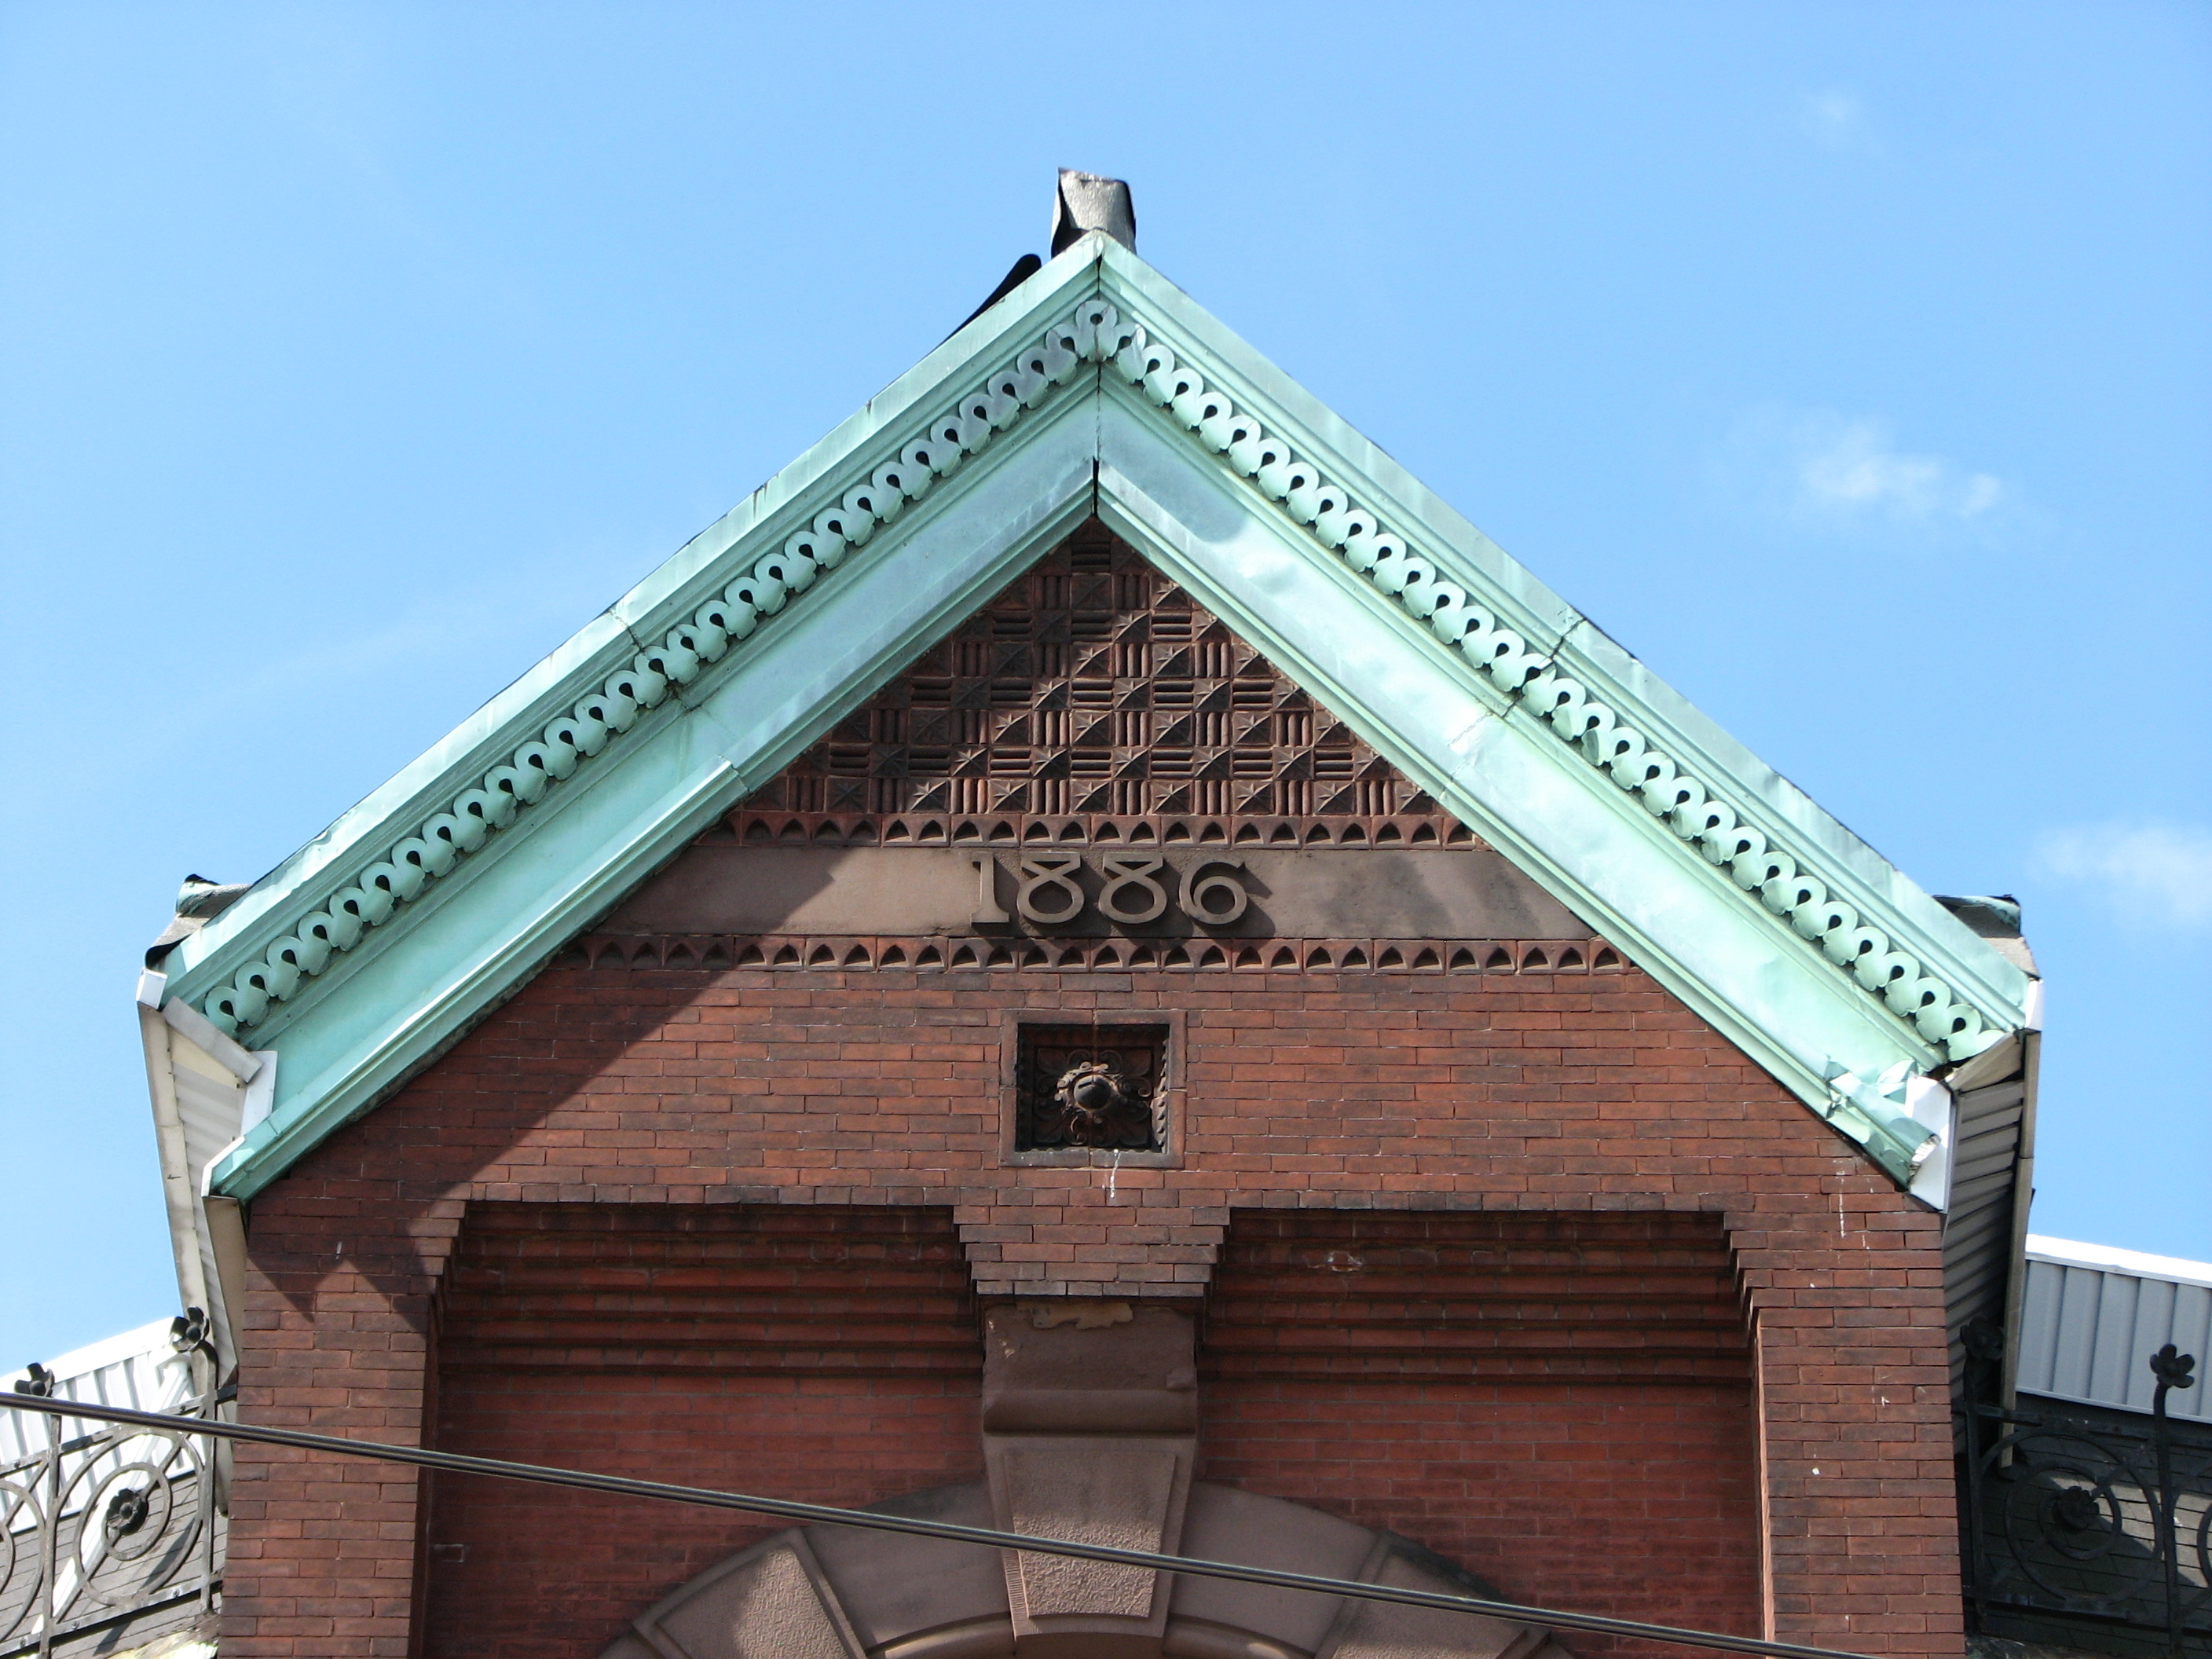 The gable at the top of the building announces the year of its birth.